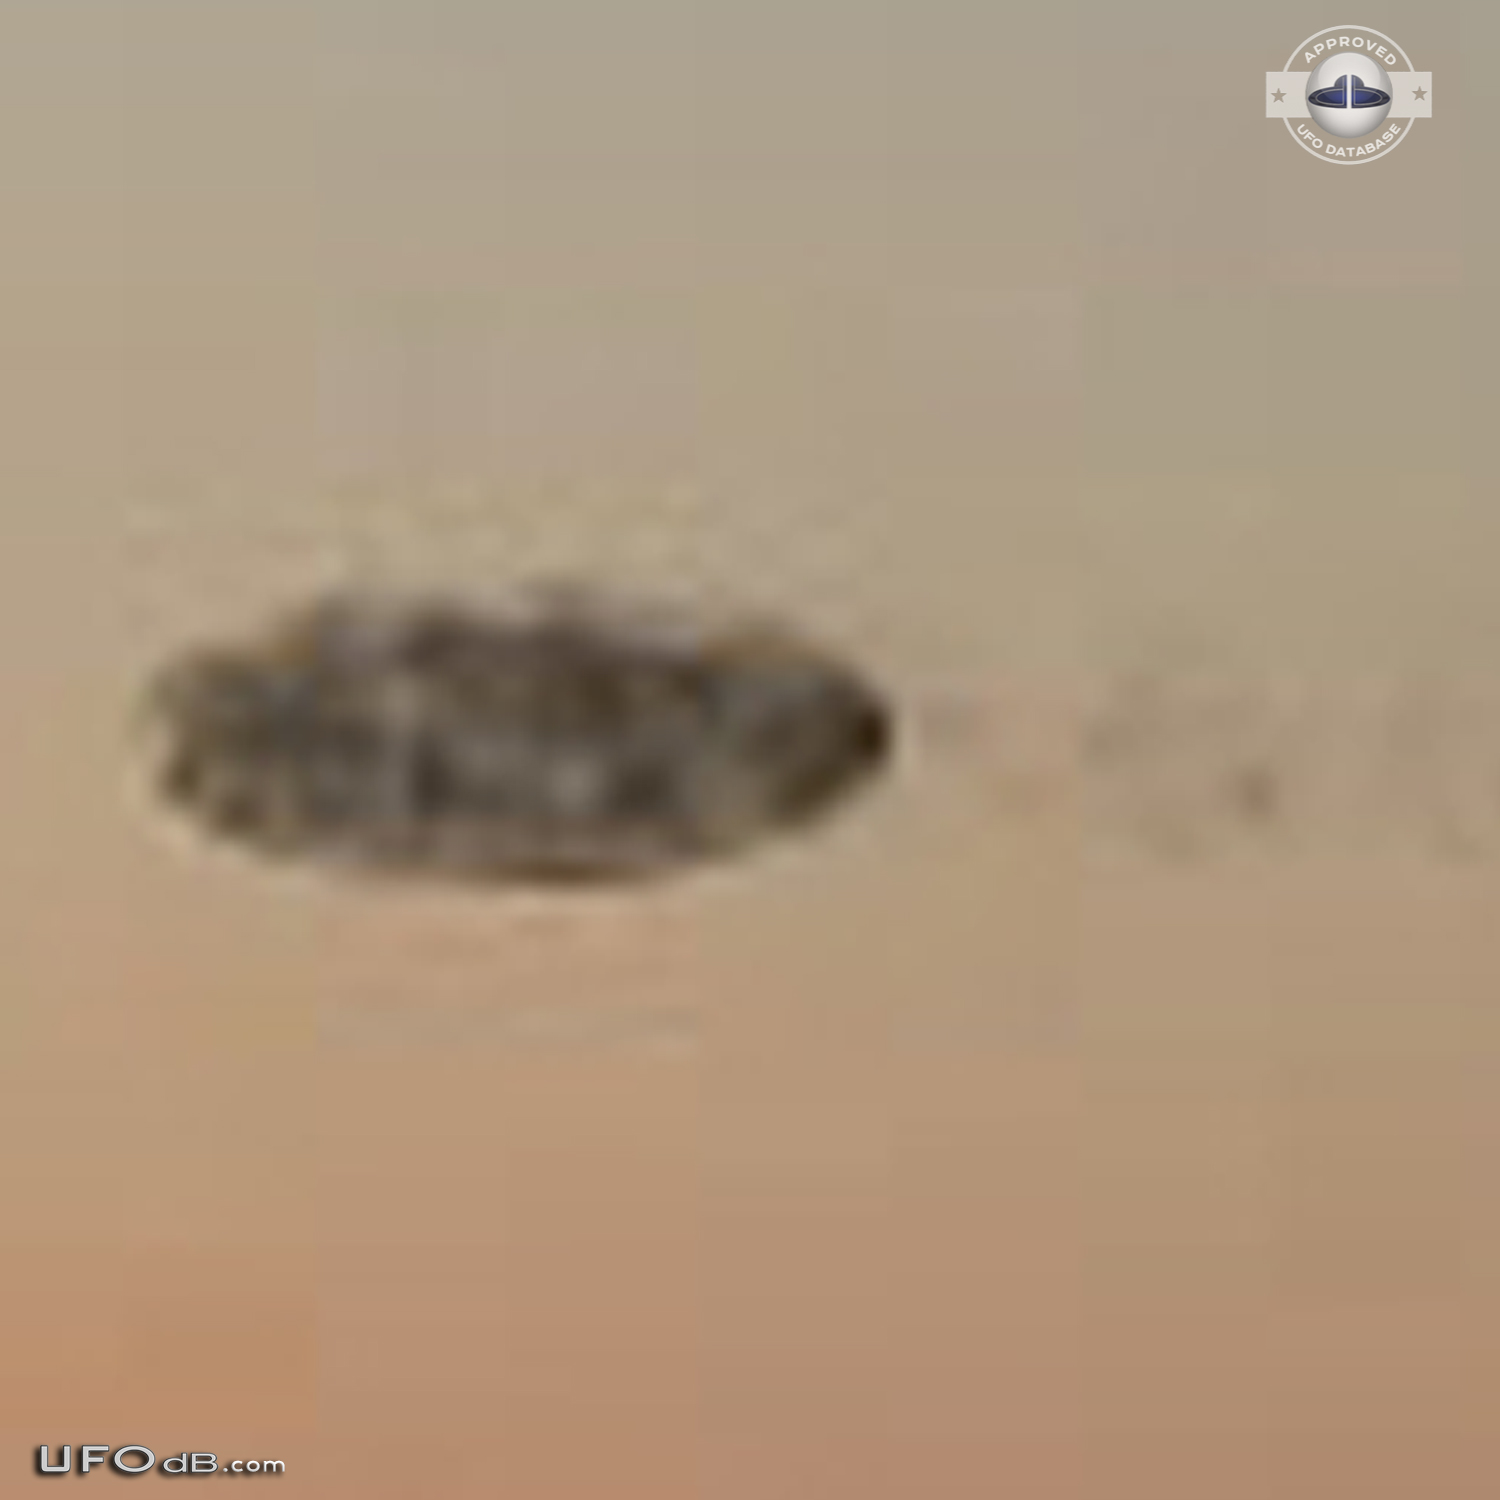 Dark shadowy disc UFO over the Mississippi New Orleans Louisiana 2012 UFO Picture #513-4